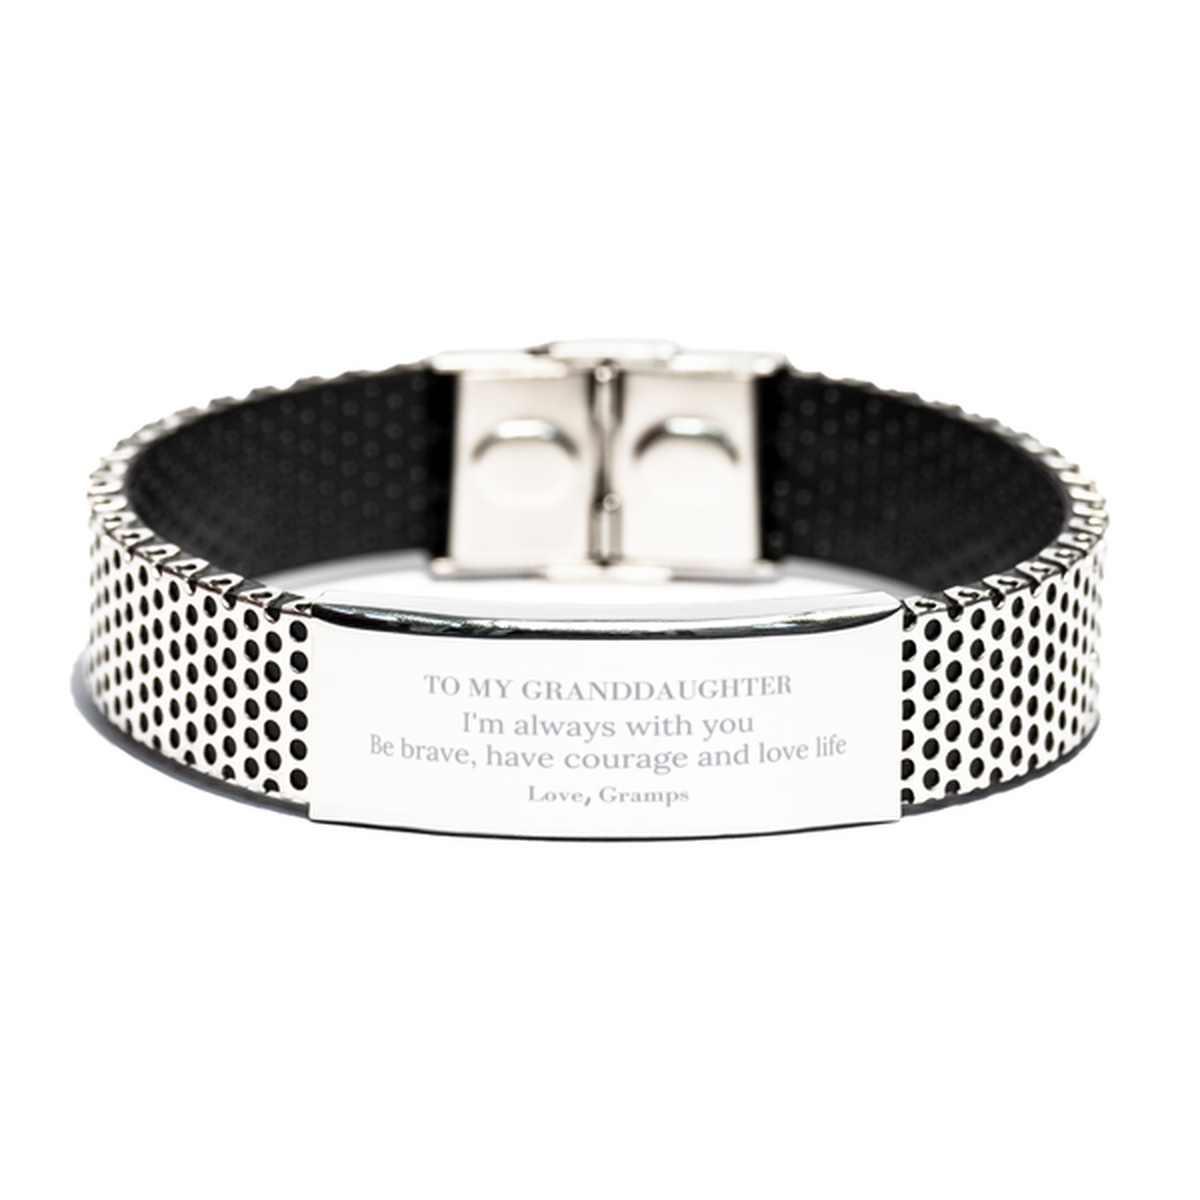 To My Granddaughter Gifts from Gramps, Unique Stainless Steel Bracelet Inspirational Christmas Birthday Graduation Gifts for Granddaughter I'm always with you. Be brave, have courage and love life. Love, Gramps